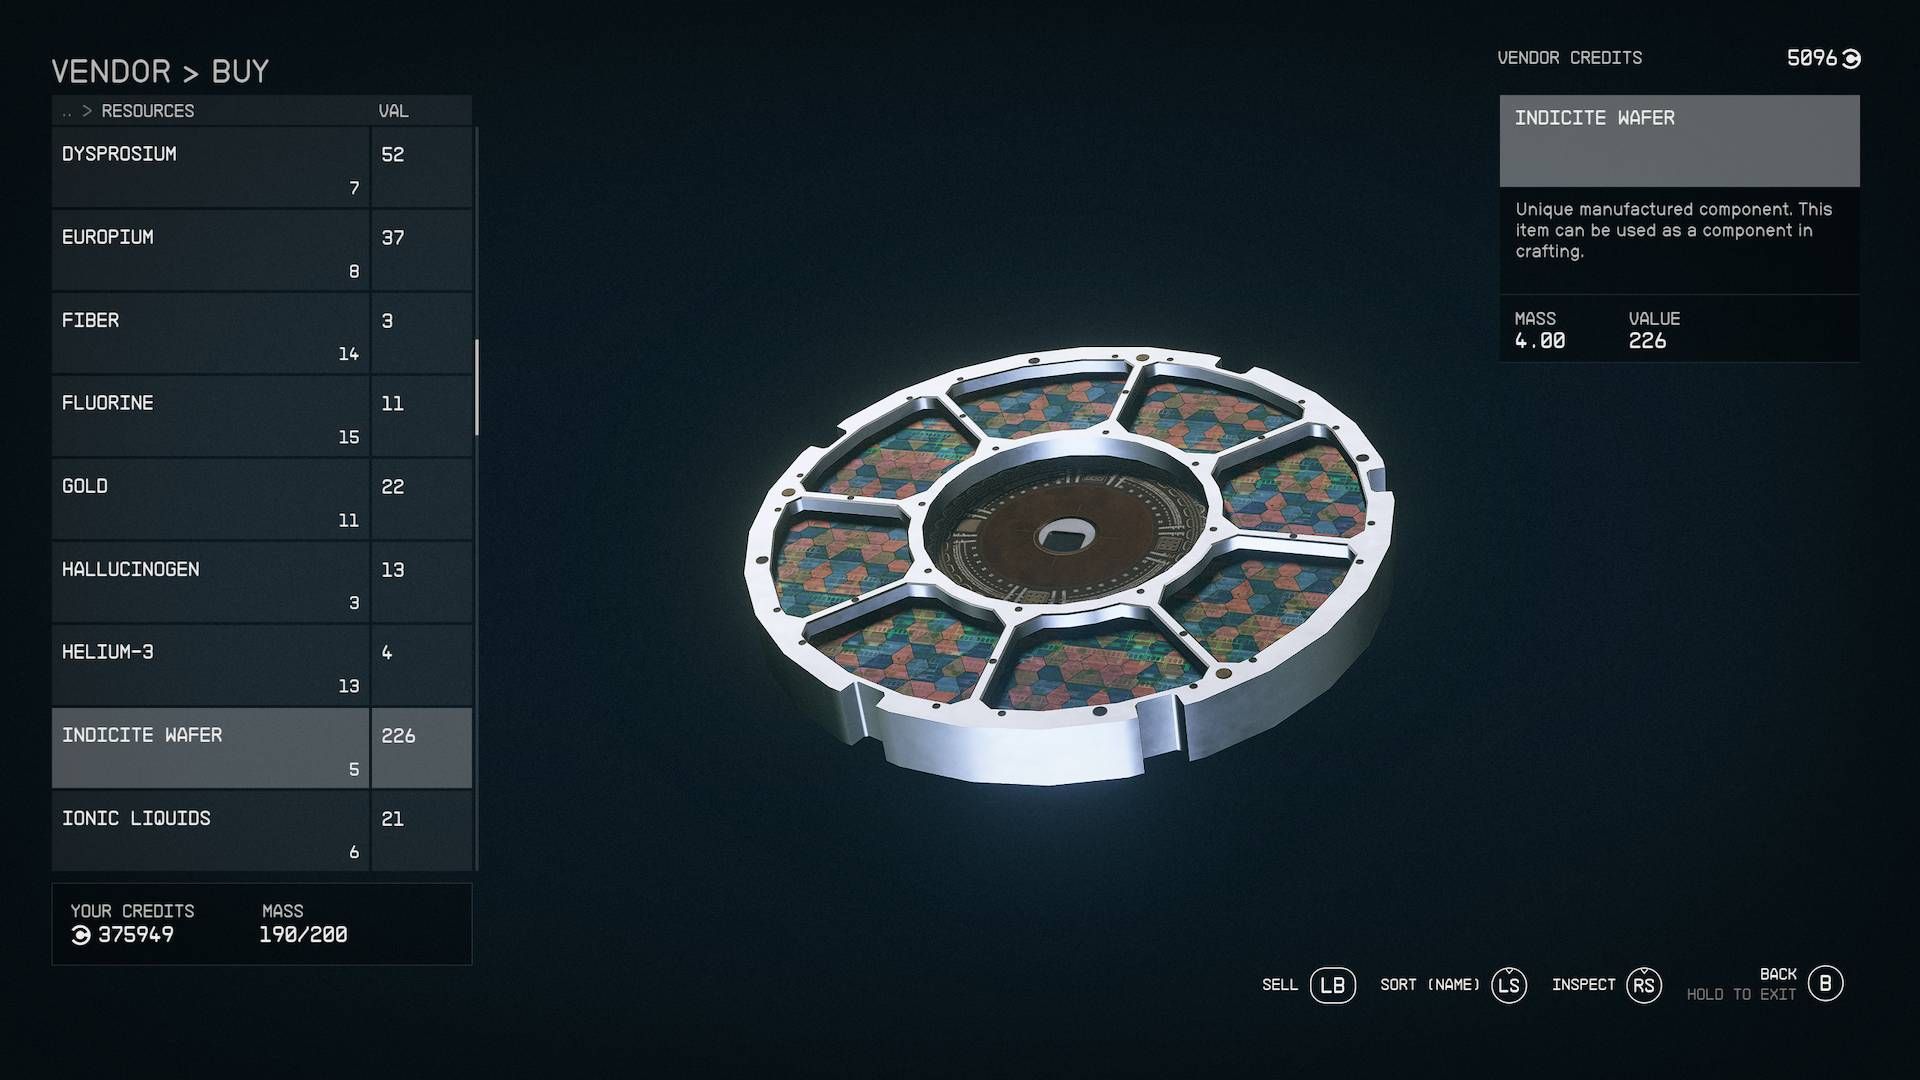 A vendor screen selling an Indicite Wafer material in Starfield.